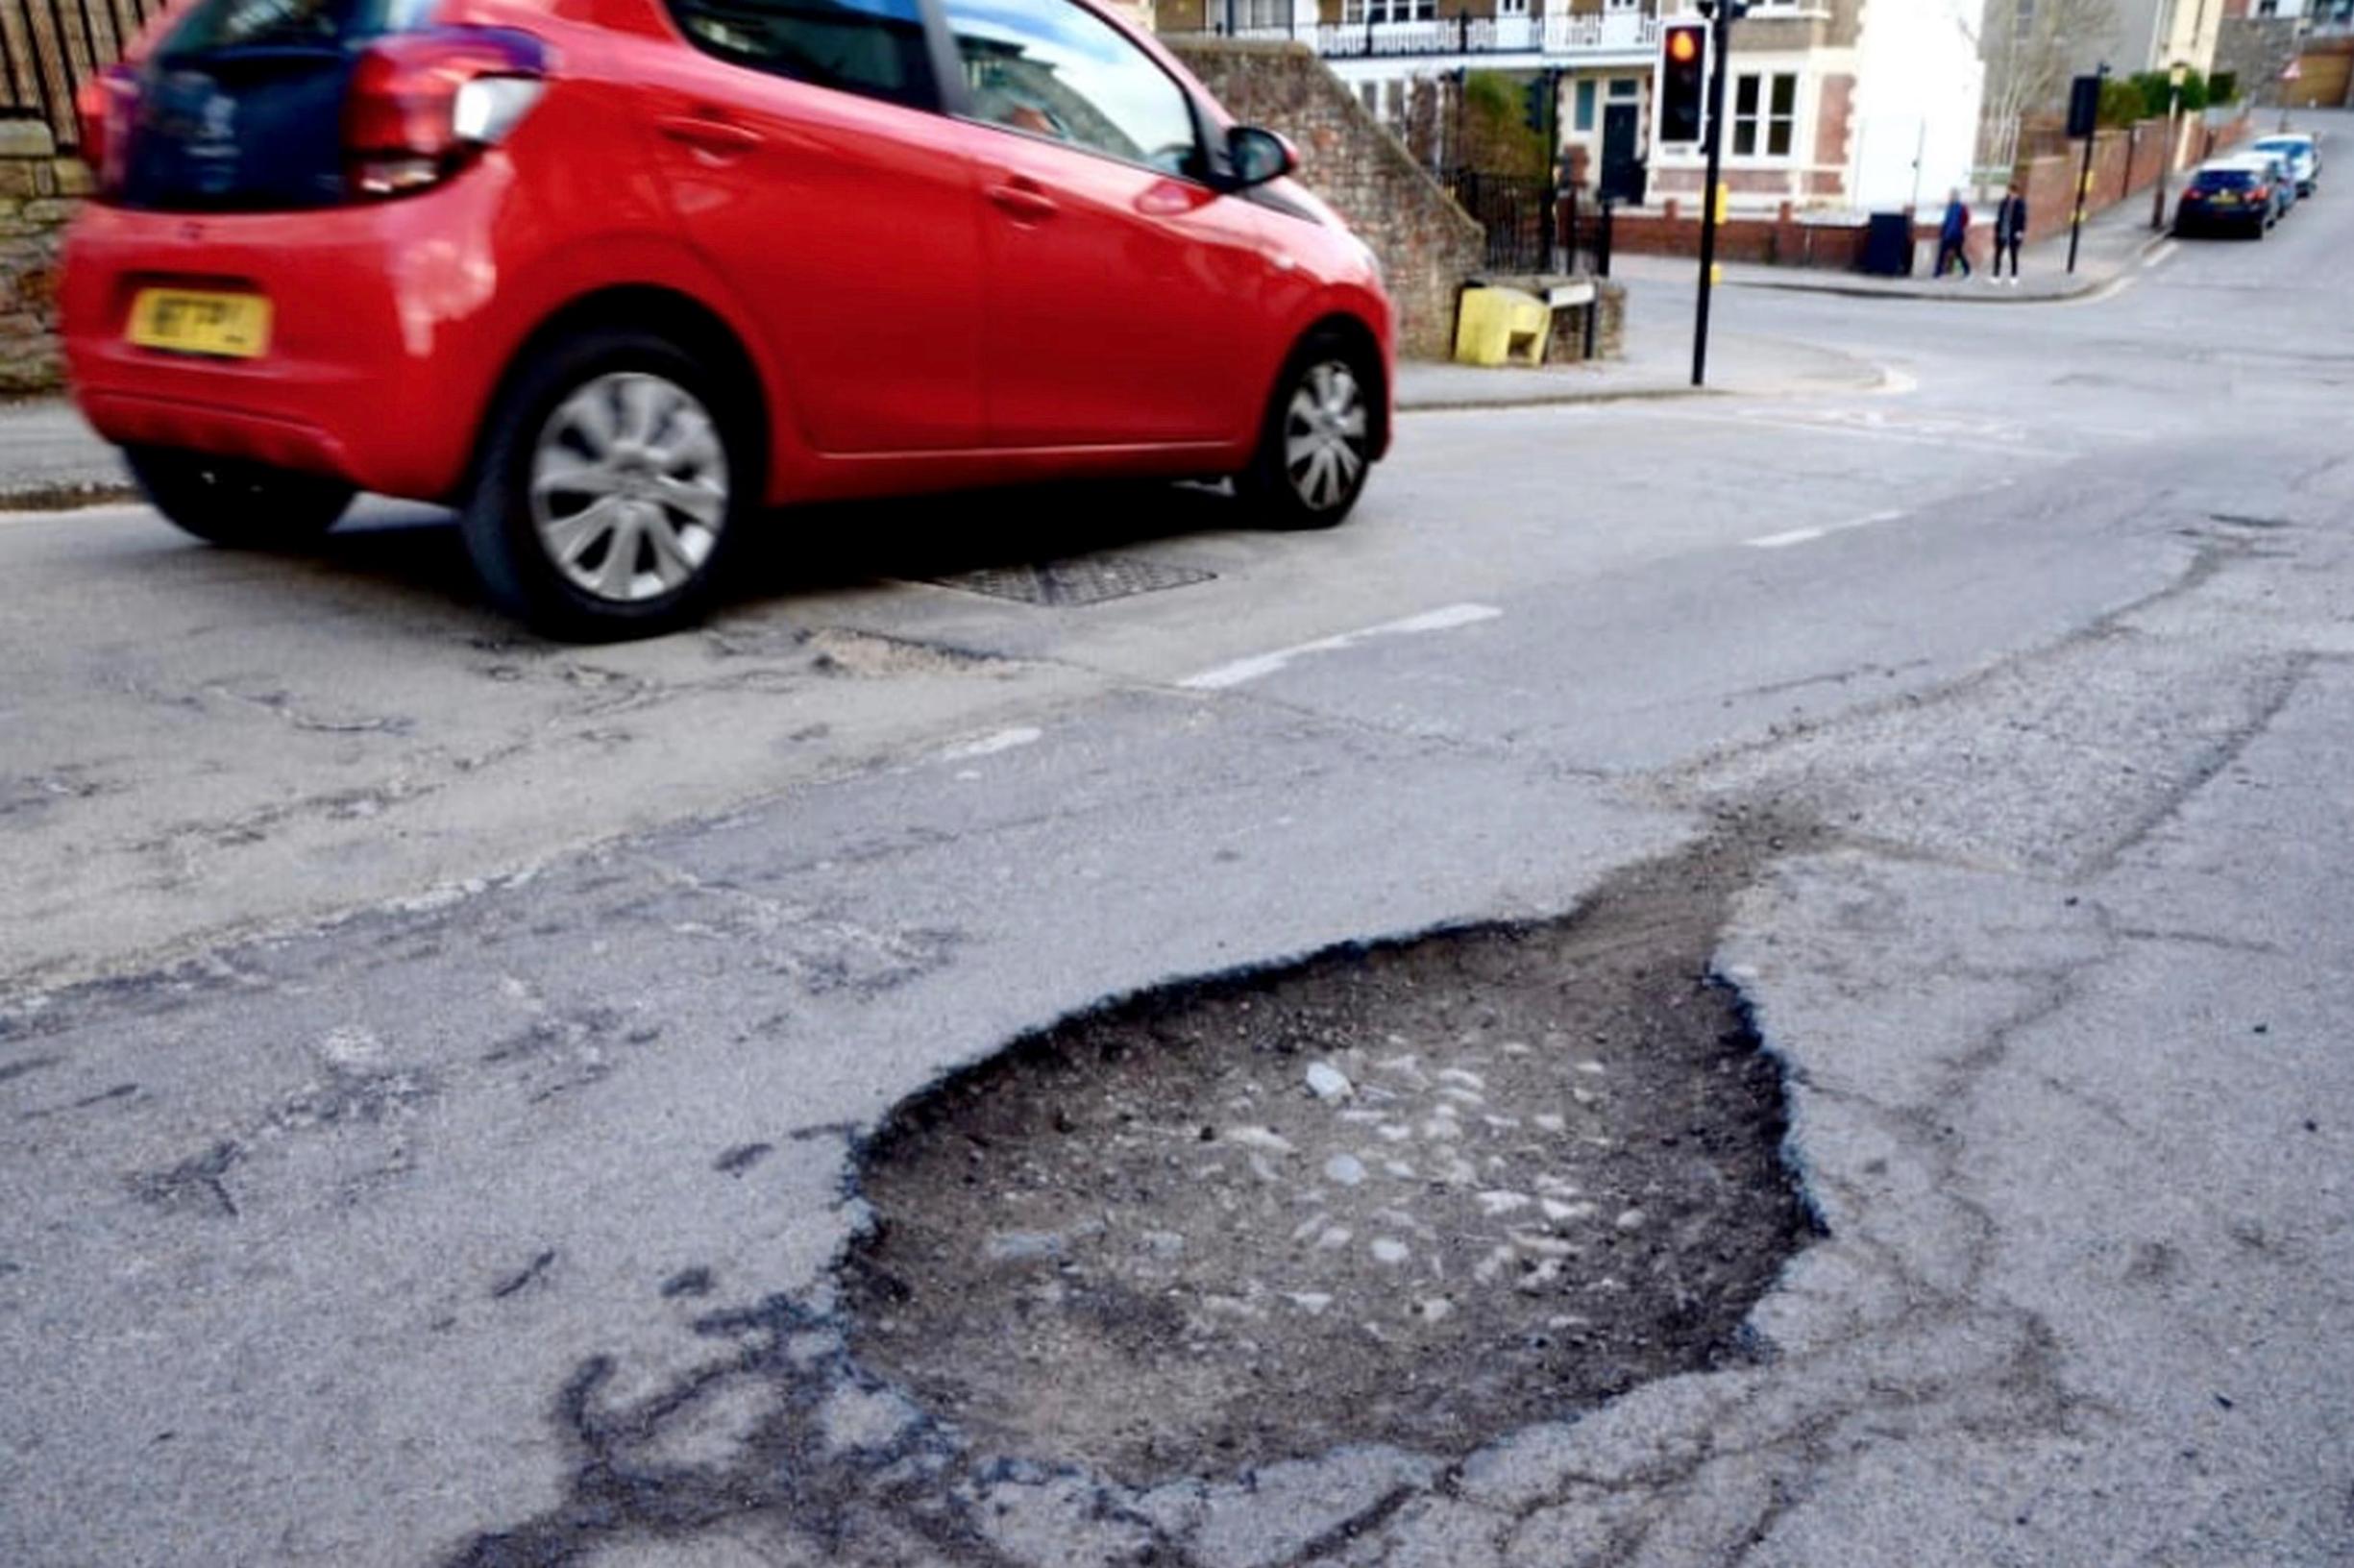 Councils have seen a 22% rise in the cost of repairing a pothole, relaying a road surface and other maintenance costs